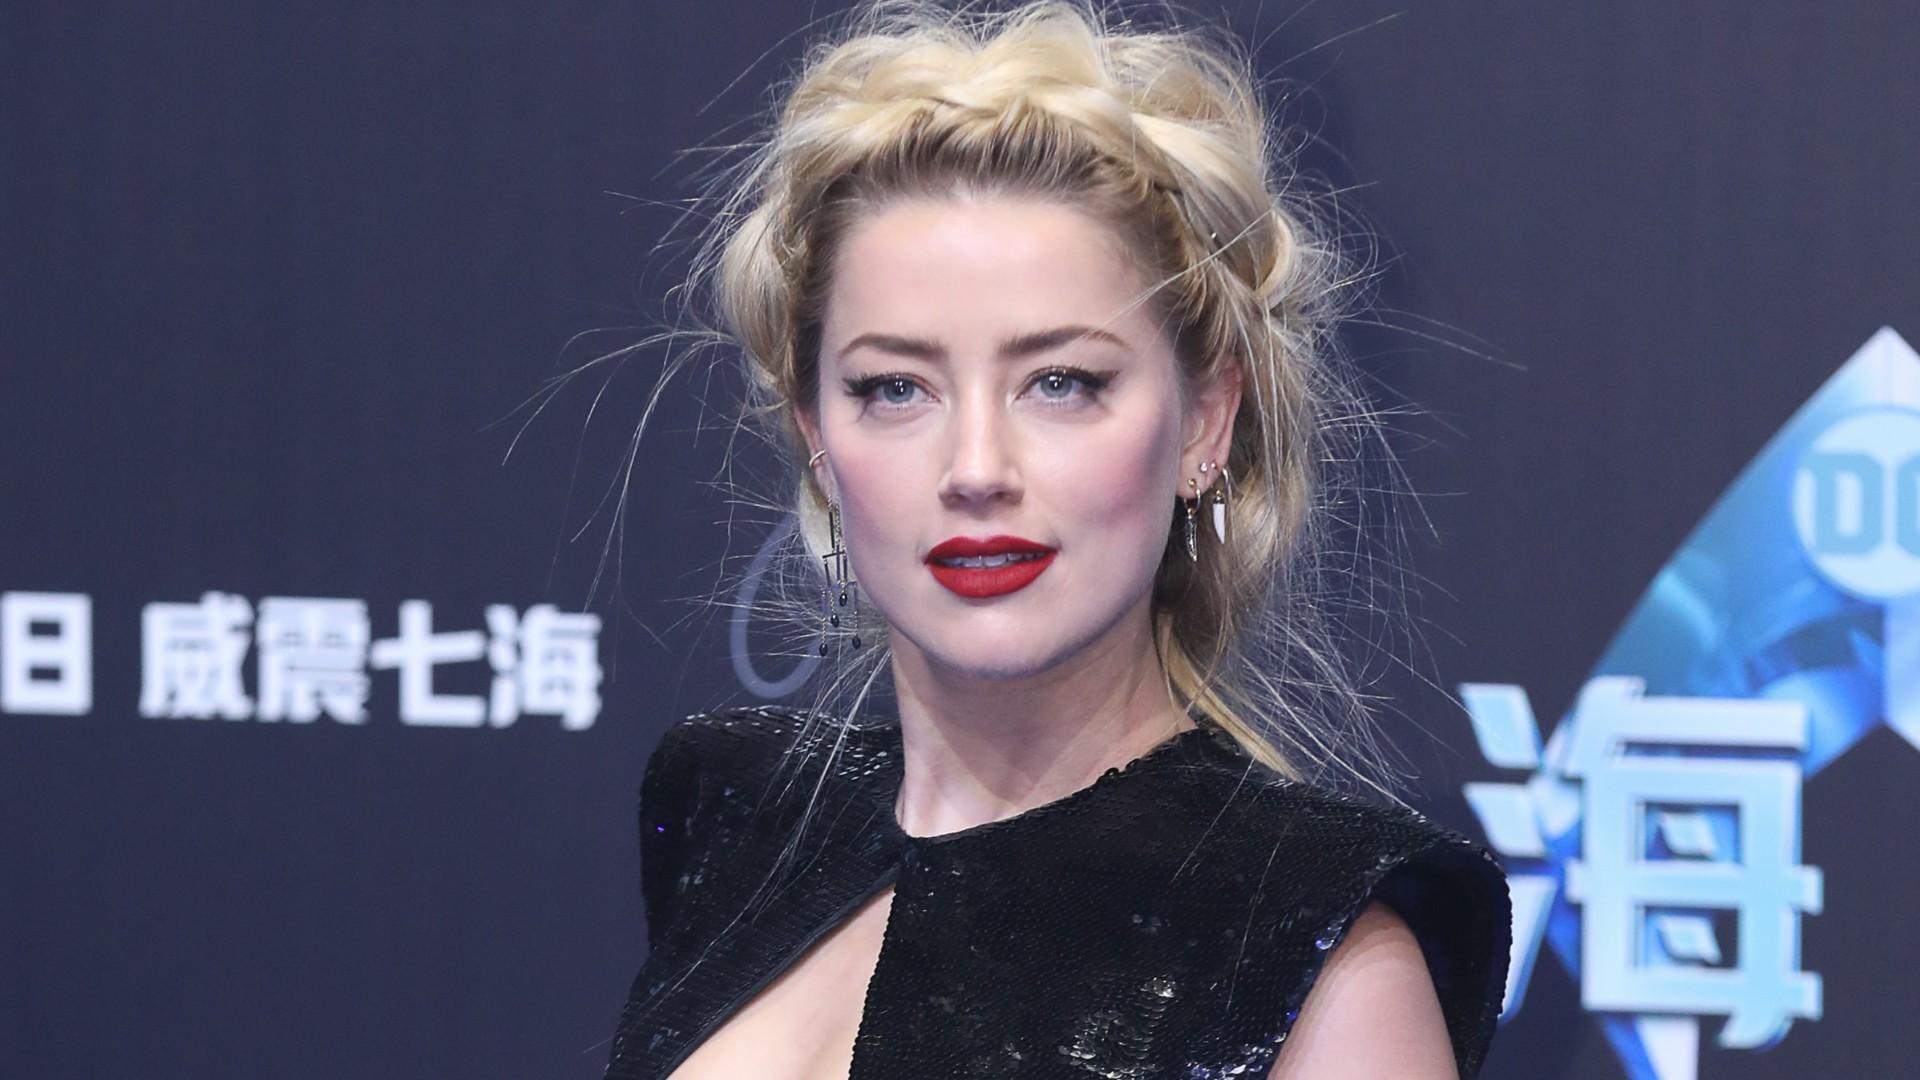 Amber Heard Discusses Her Divorce & Being a Survivor in New